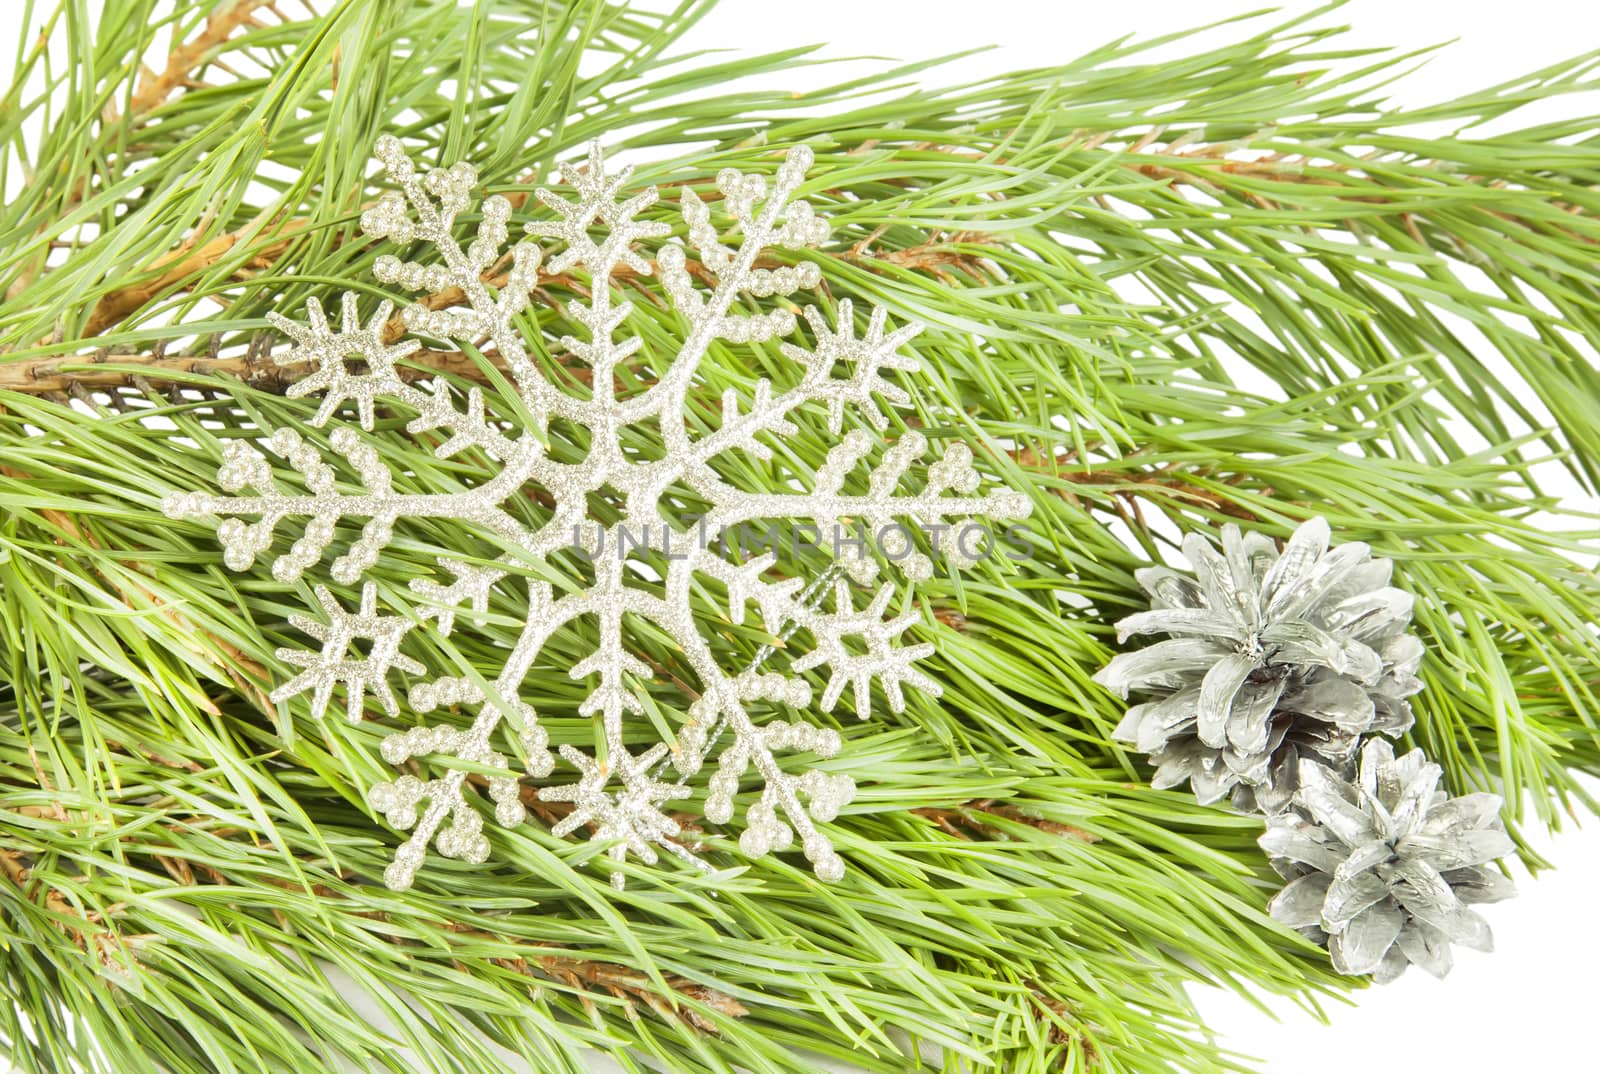 Artificial new year snowflake on fir tree branch christmas backg by RawGroup